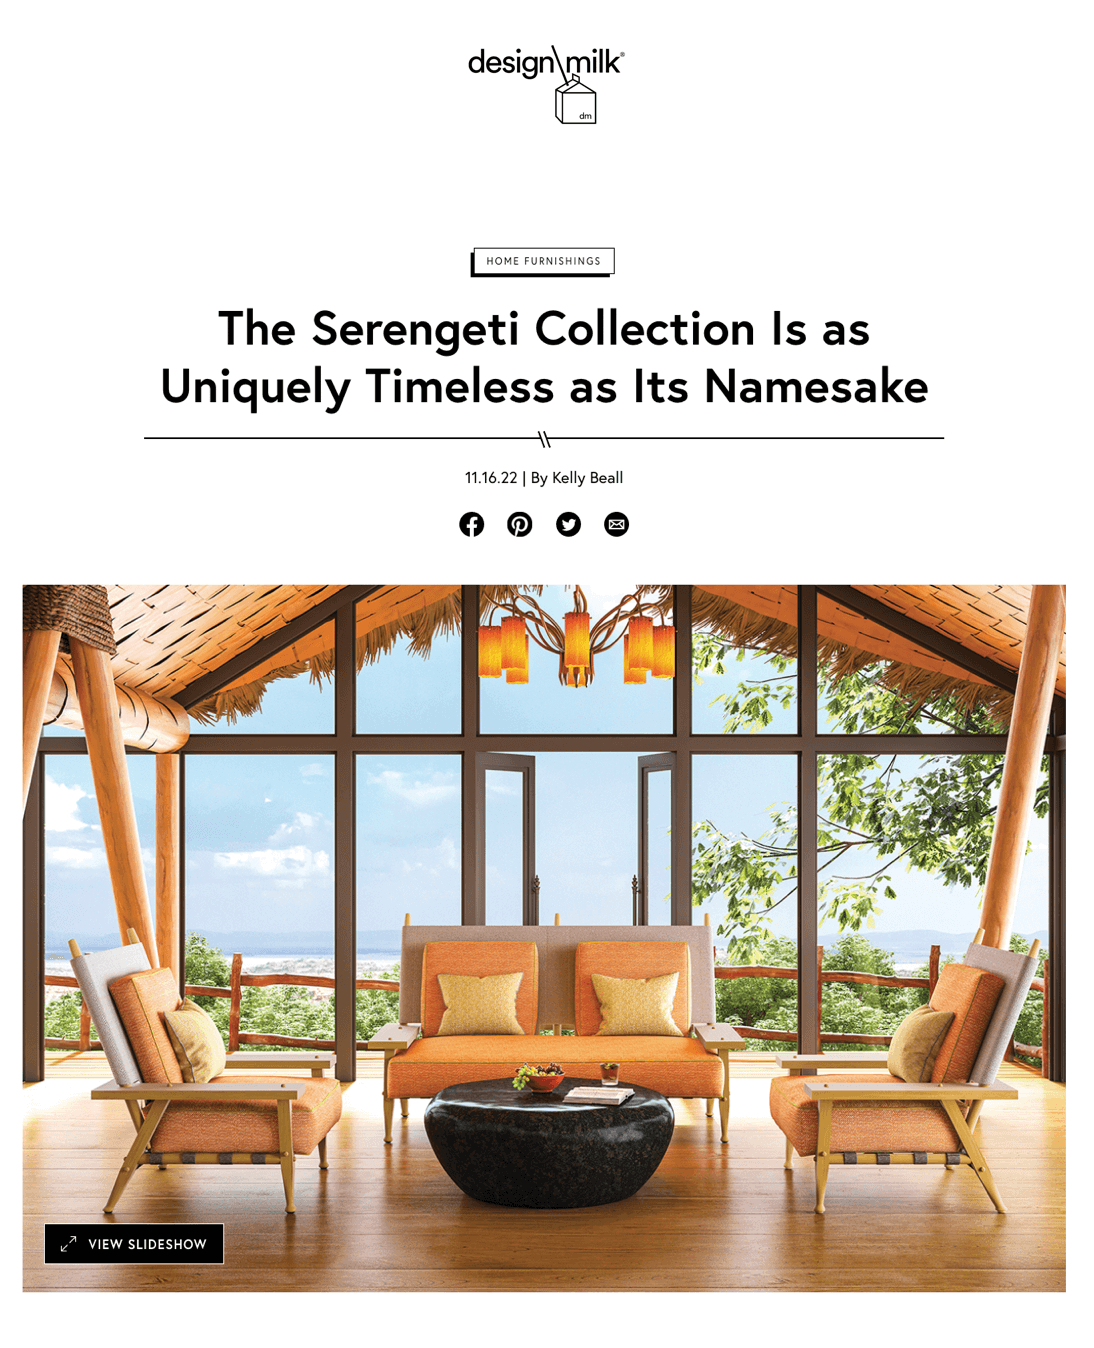 The Serengeti Collection Is as Uniquely Timeless as Its Namesake